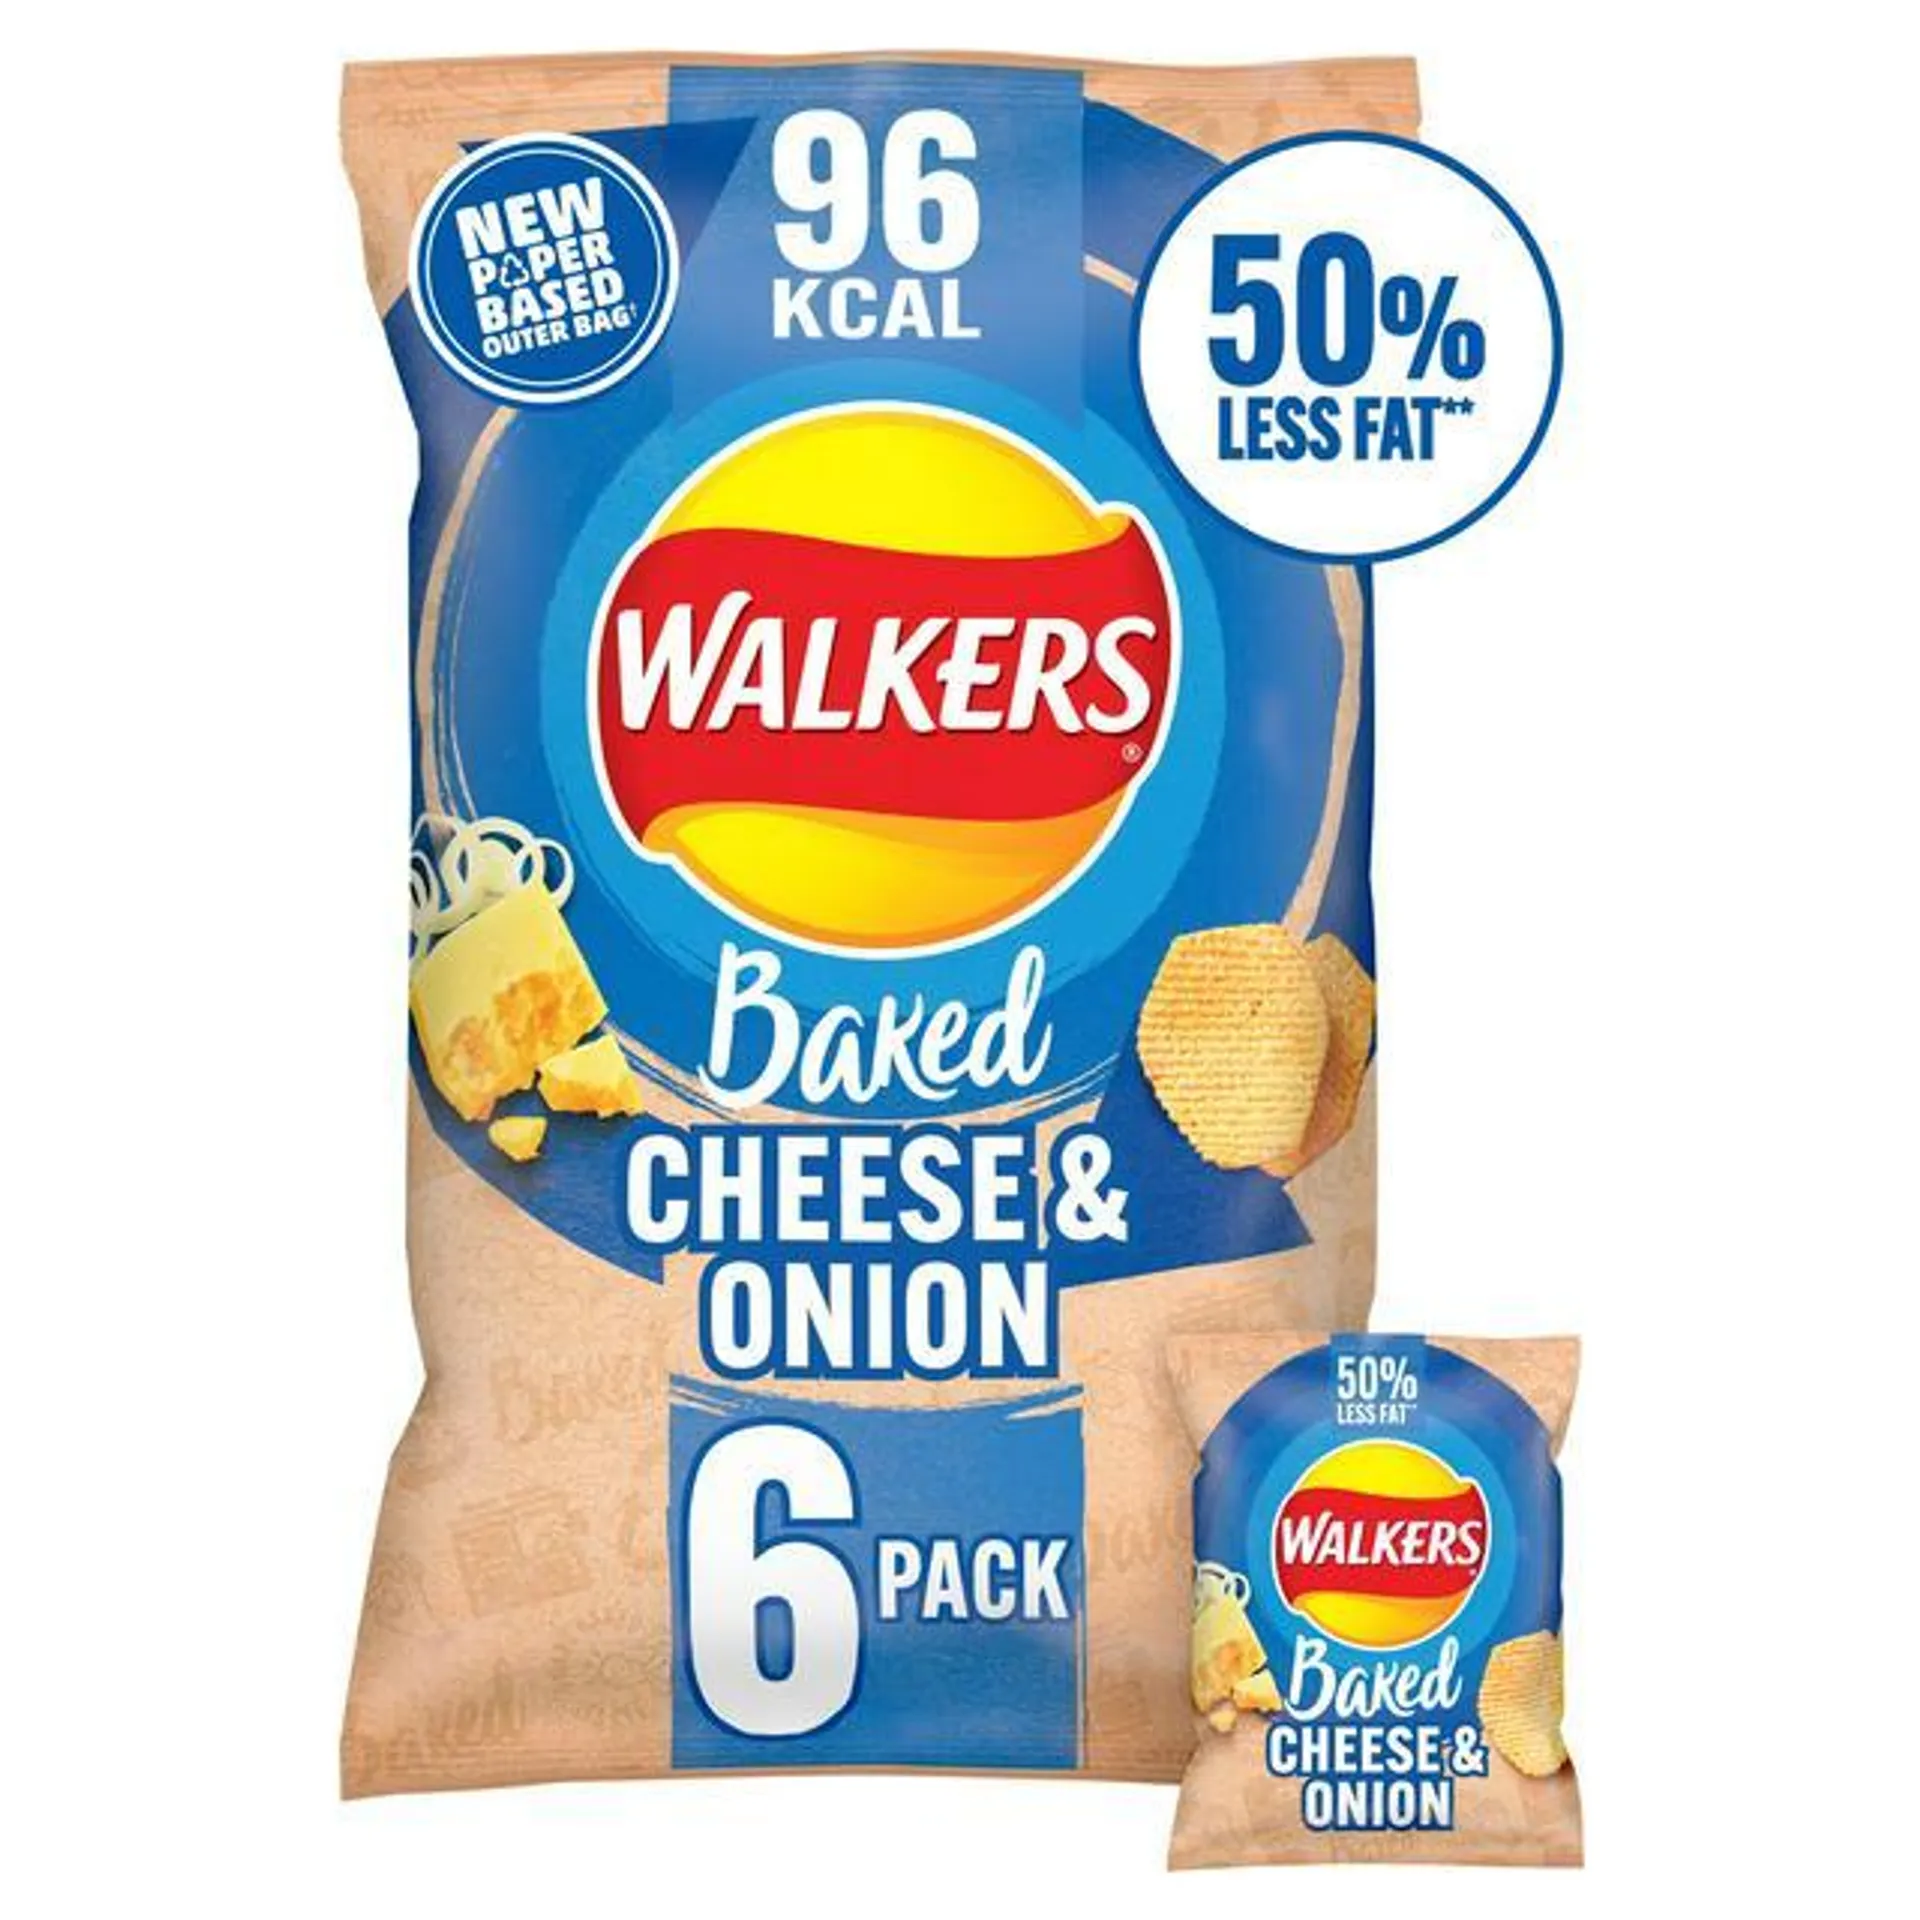 Walkers Baked Cheese & Onion Multipack Crisps Snacks 6x22g